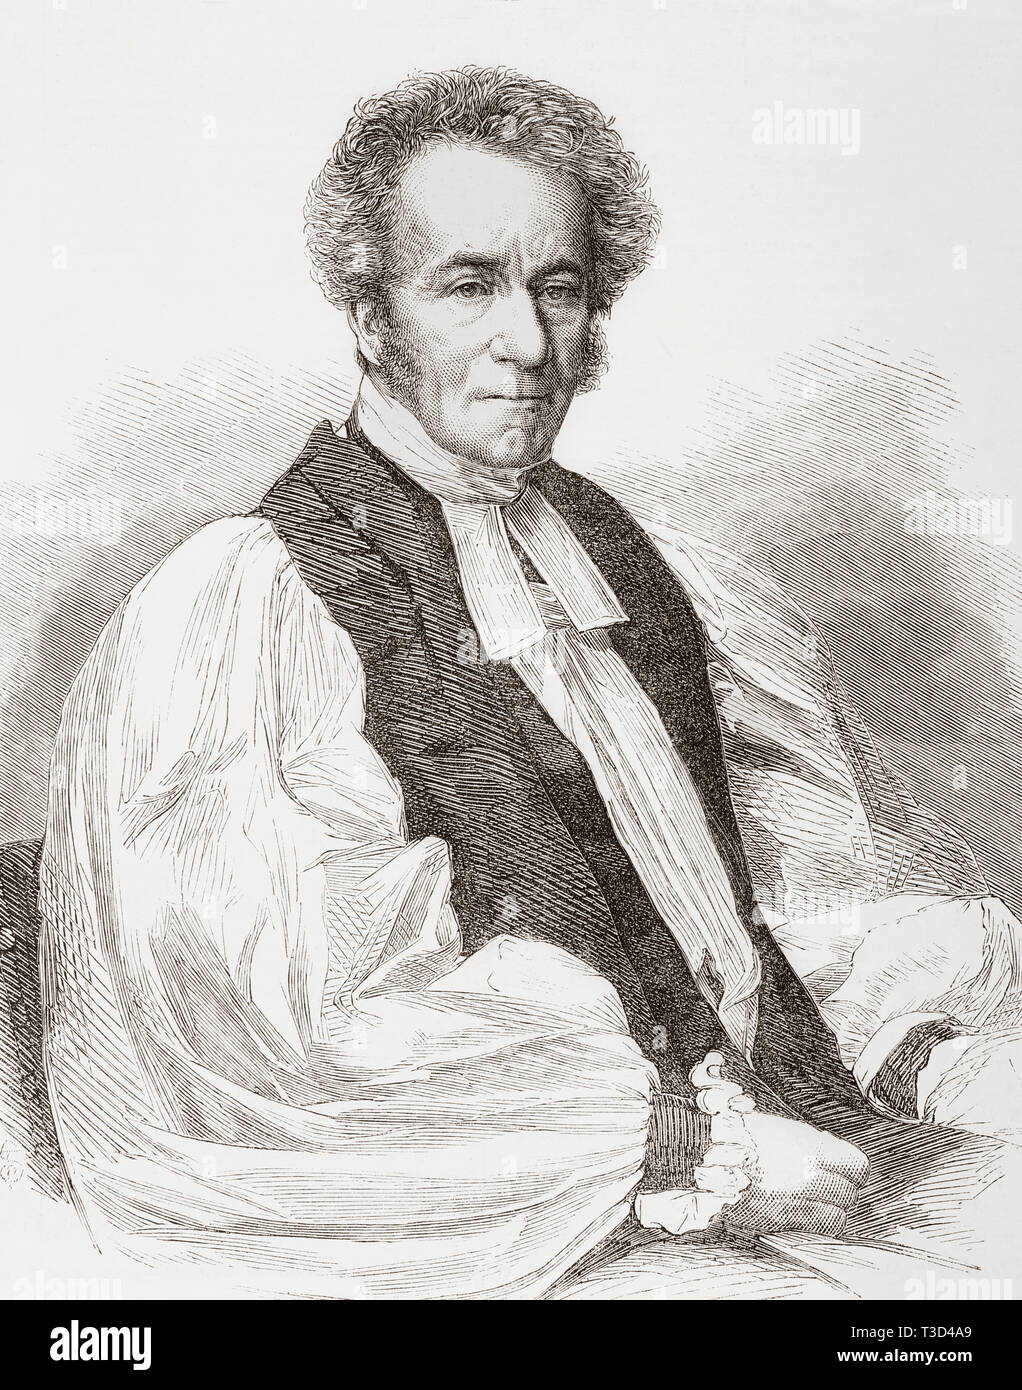 William Jacobson, 1803 – 1884.  Regius Professor of Divinity at Oxford University and Bishop of Chester.  From The Illustrated London News, published 1865. Stock Photo